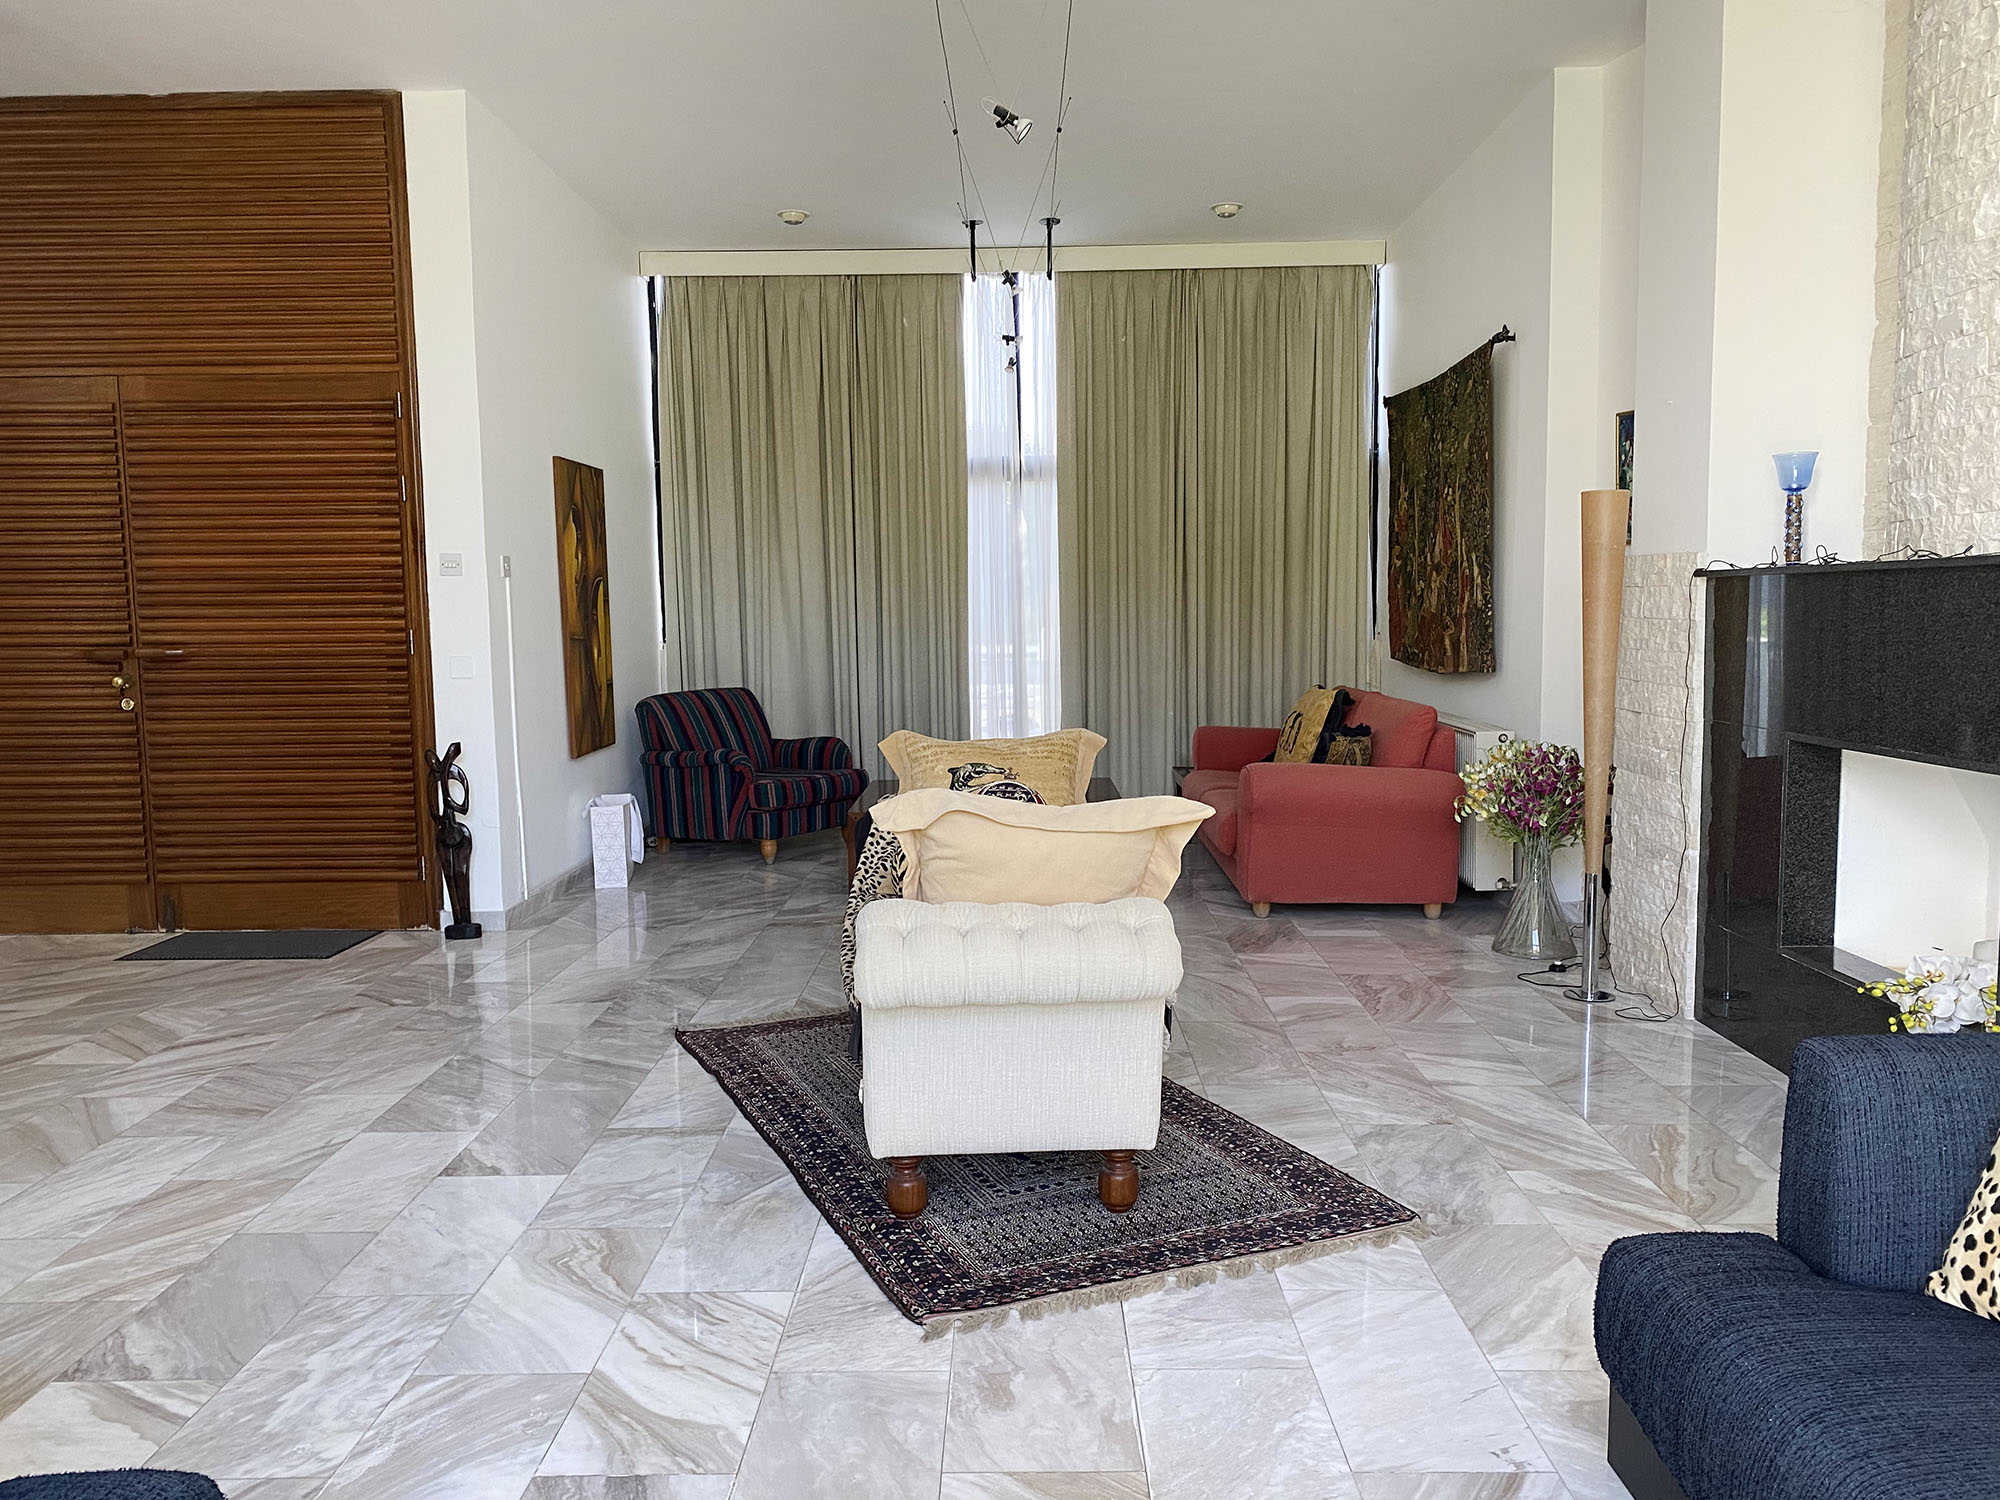 4 Bedroom House for Sale in Nicosia